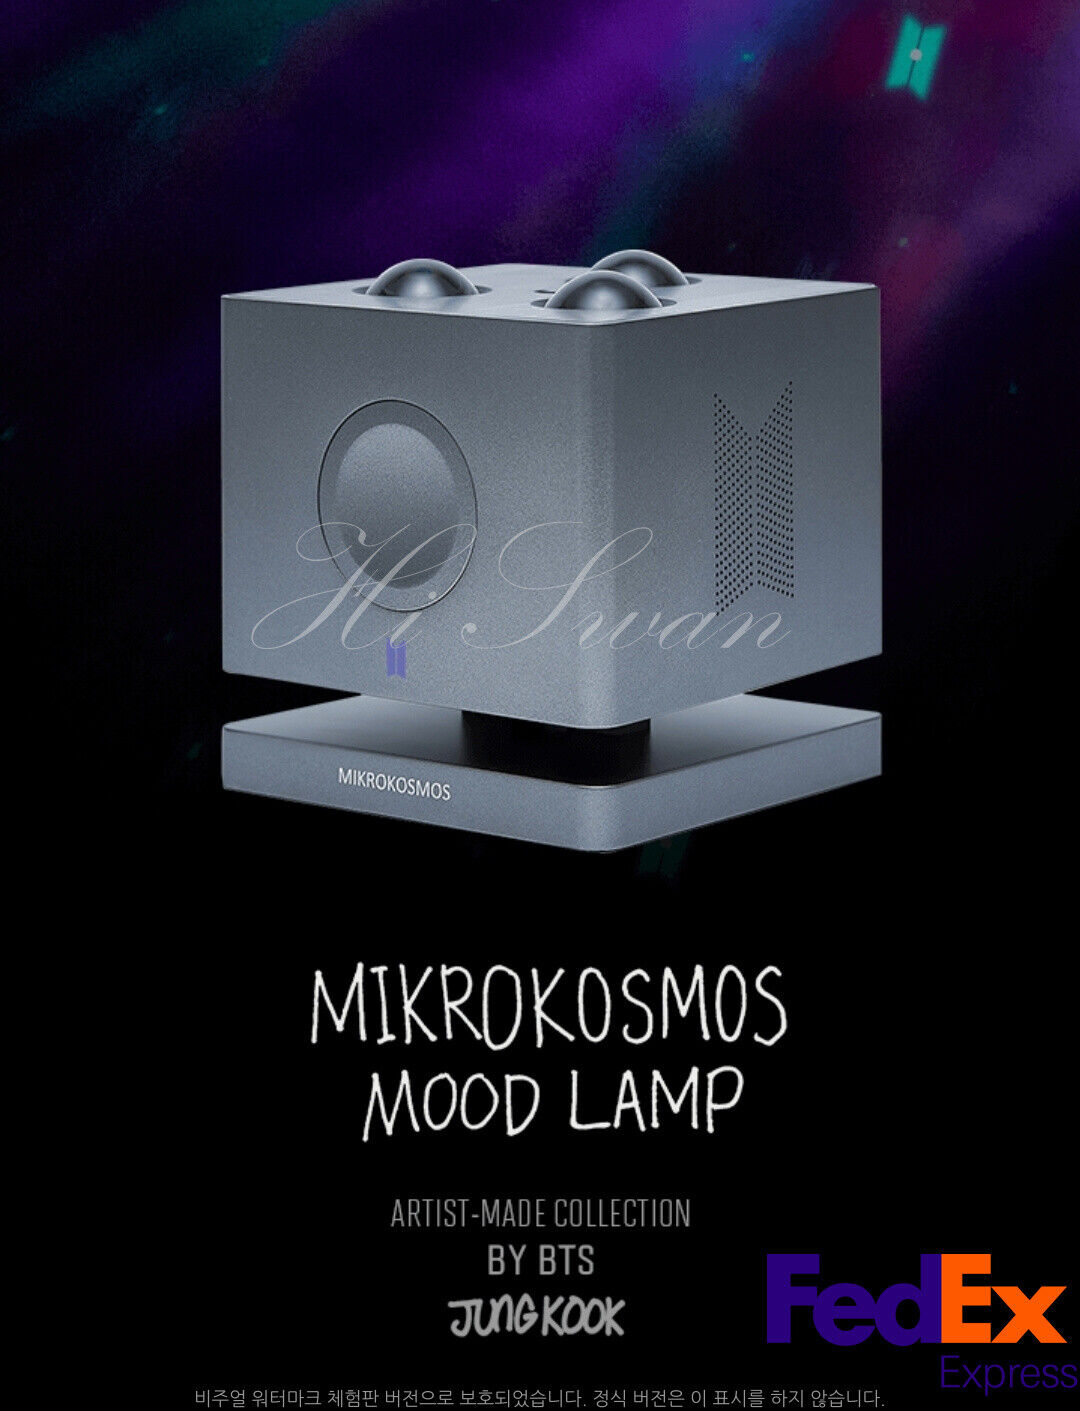 [BTS] - ARTIST-MADE COLLECTION BY BTS : Jung Kook Mikrokosmos Mood Lamp  Pre-Sale | eBay